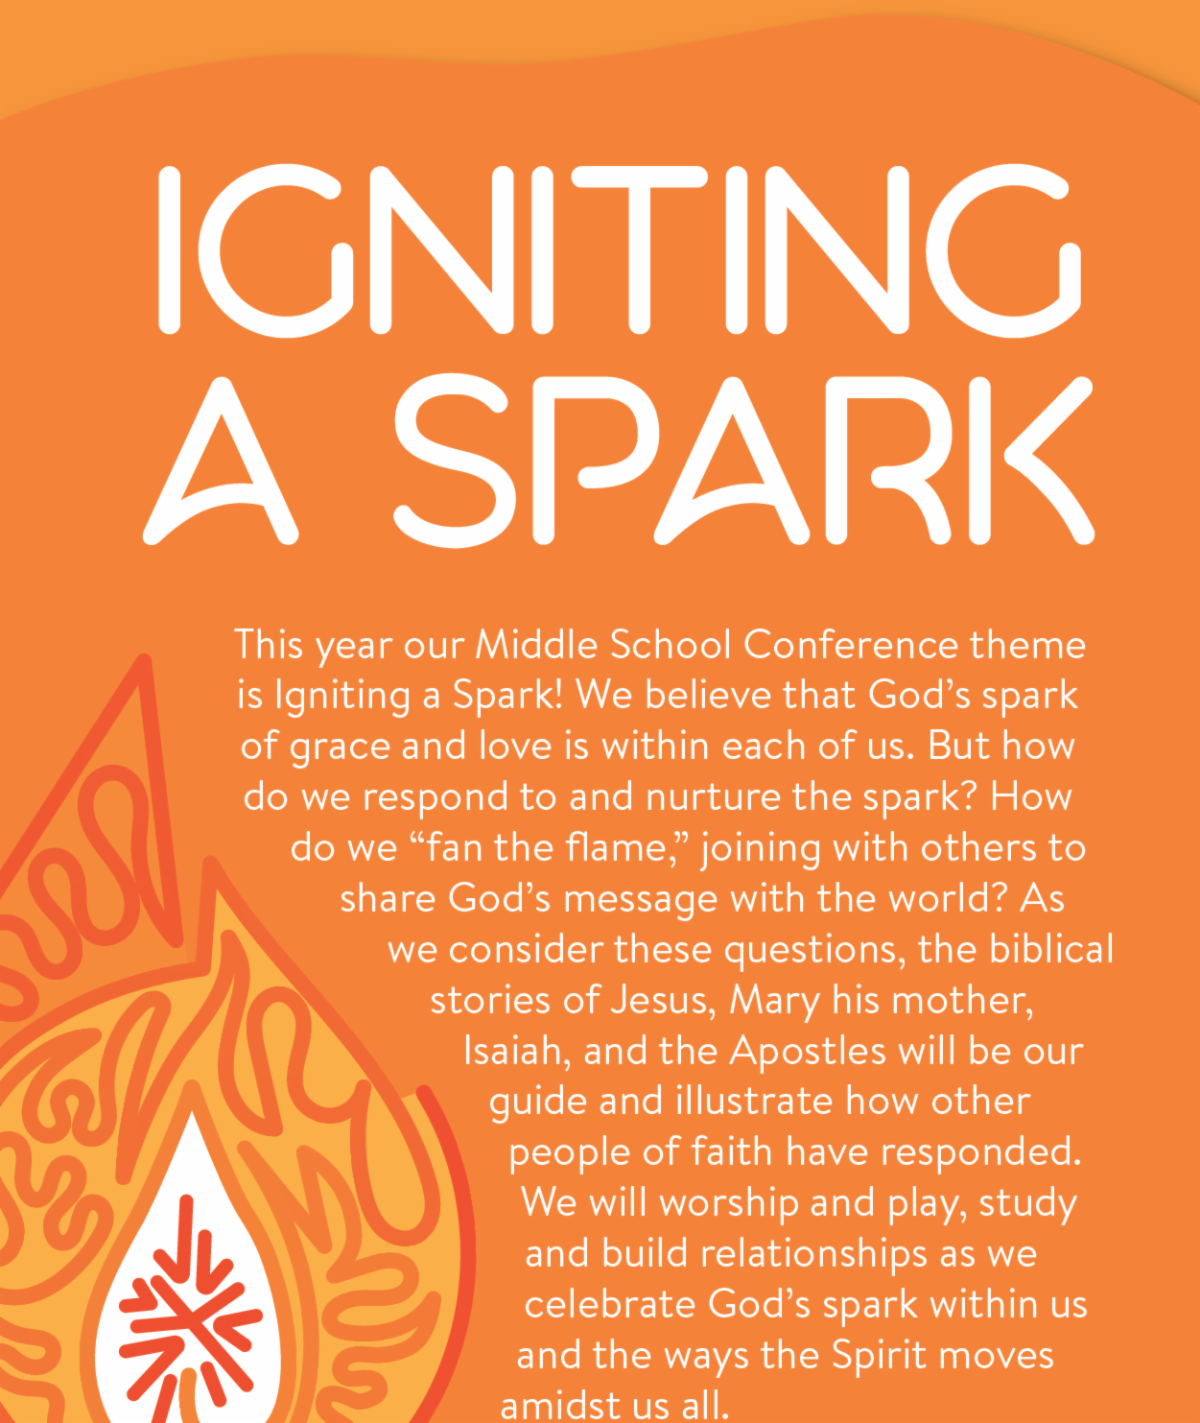 This year our Middle School Conference theme is Igniting a Spark! We believe that God’s spark of grace and love is within each of us. But how do we respond to and nurture the spark? How do we “fan the flame,” joining with others to share God’s message with the world? As we consider these questions, the biblical stories of Jesus, Mary his mother, Isaiah, and the Apostles will be our guide and illustrate how other people of faith have responded.  We will worship and play, study and build relationships as we celebrate God’s spark within us and the ways the Spirit moves amidst us all.